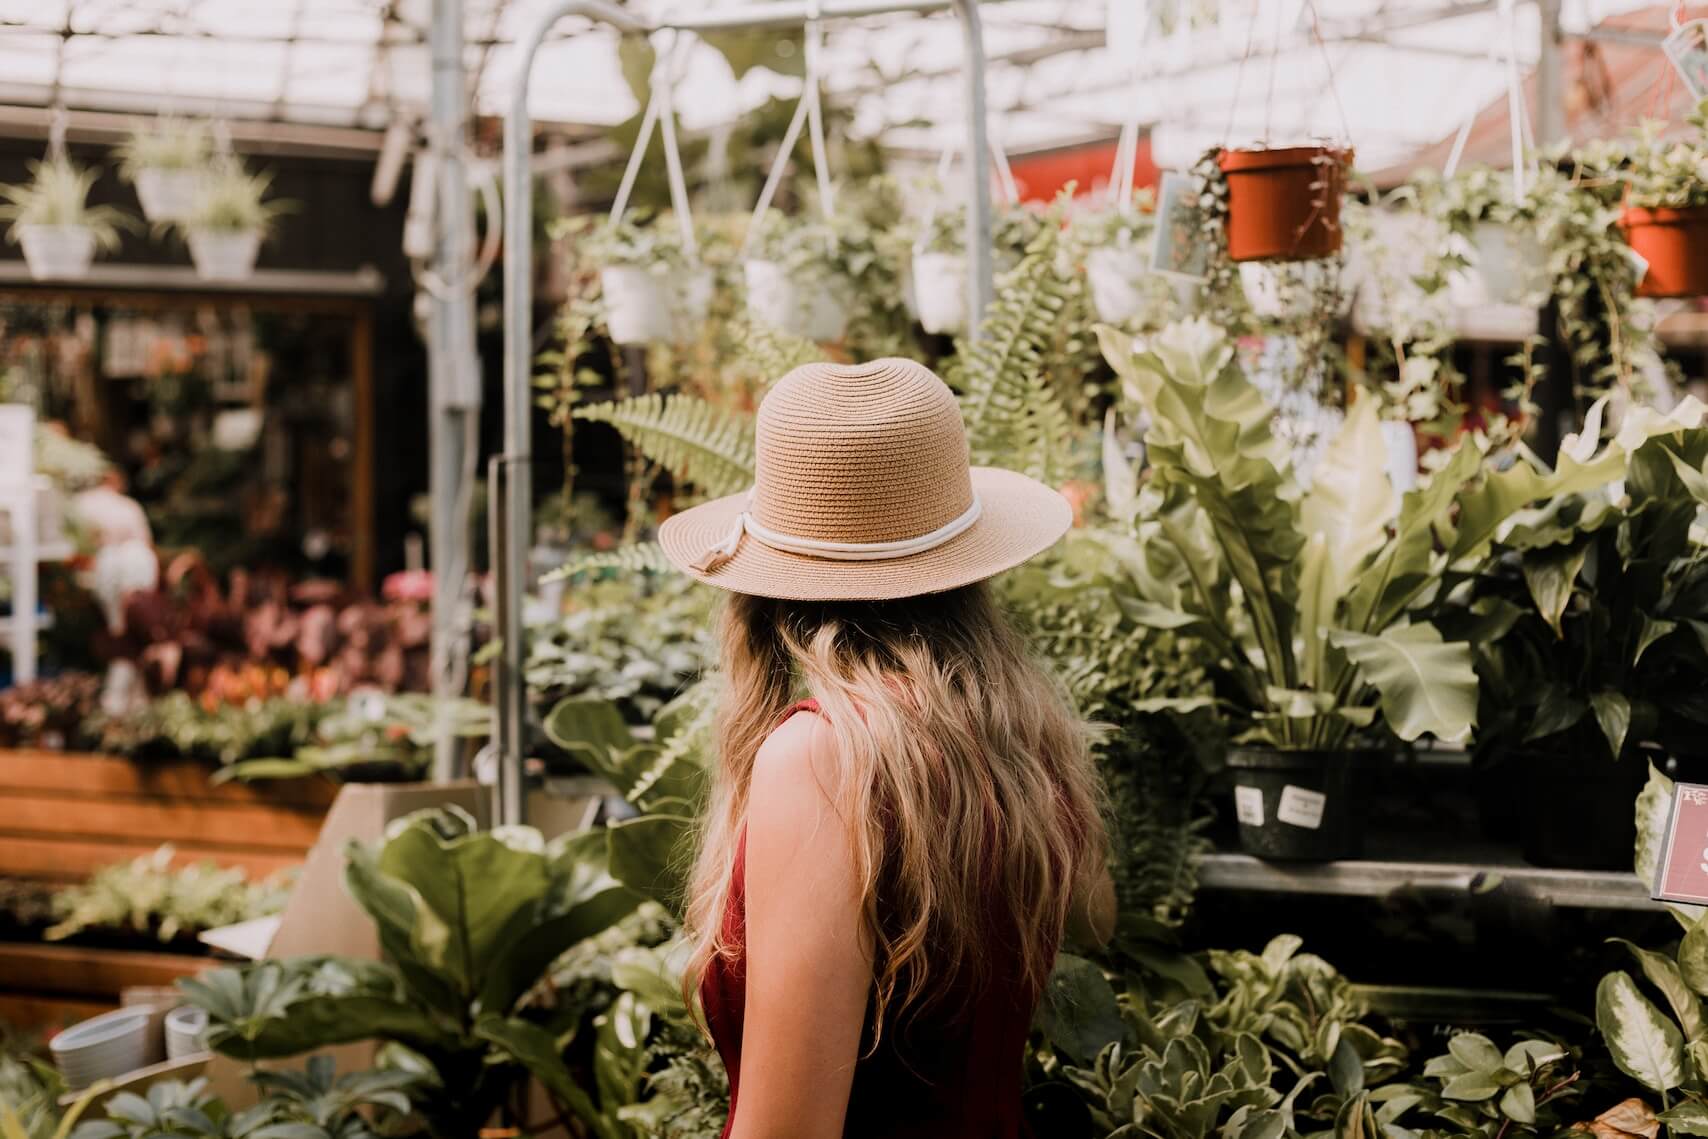 A person wearing a straw hat standing in a greenhouse garden shop.